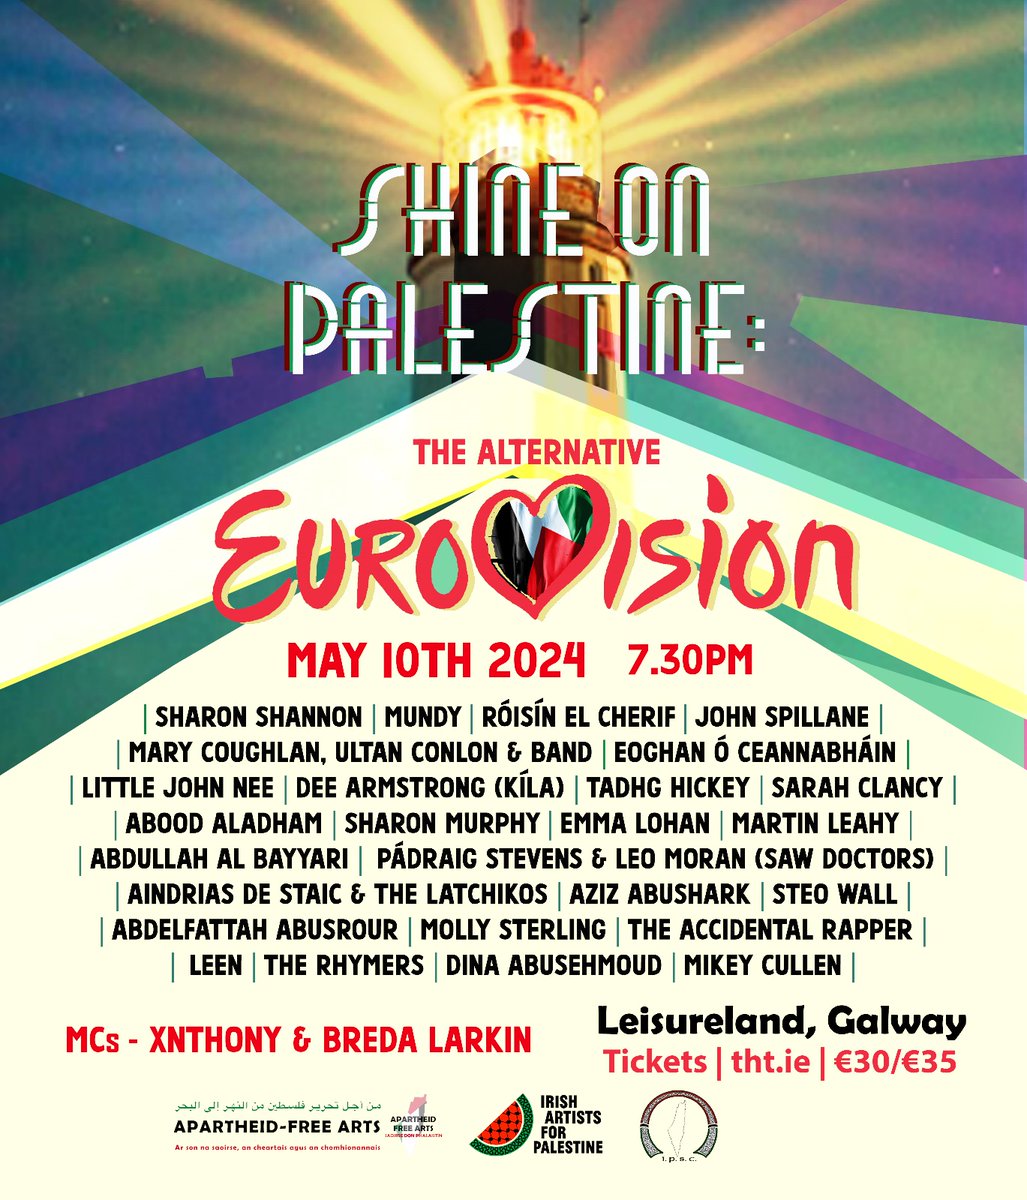 Shine on Palestine, an alternative Eurovision event, takes place in Leisureland tomorrow night The line-up includes Sharon Shannon, Mary Coughlan, Little John Nee, Tadhg Hickey and many more Tickets: tht.ticketsolve.com/ticketbooth/sh… @ApartFreeArts @_IAFP